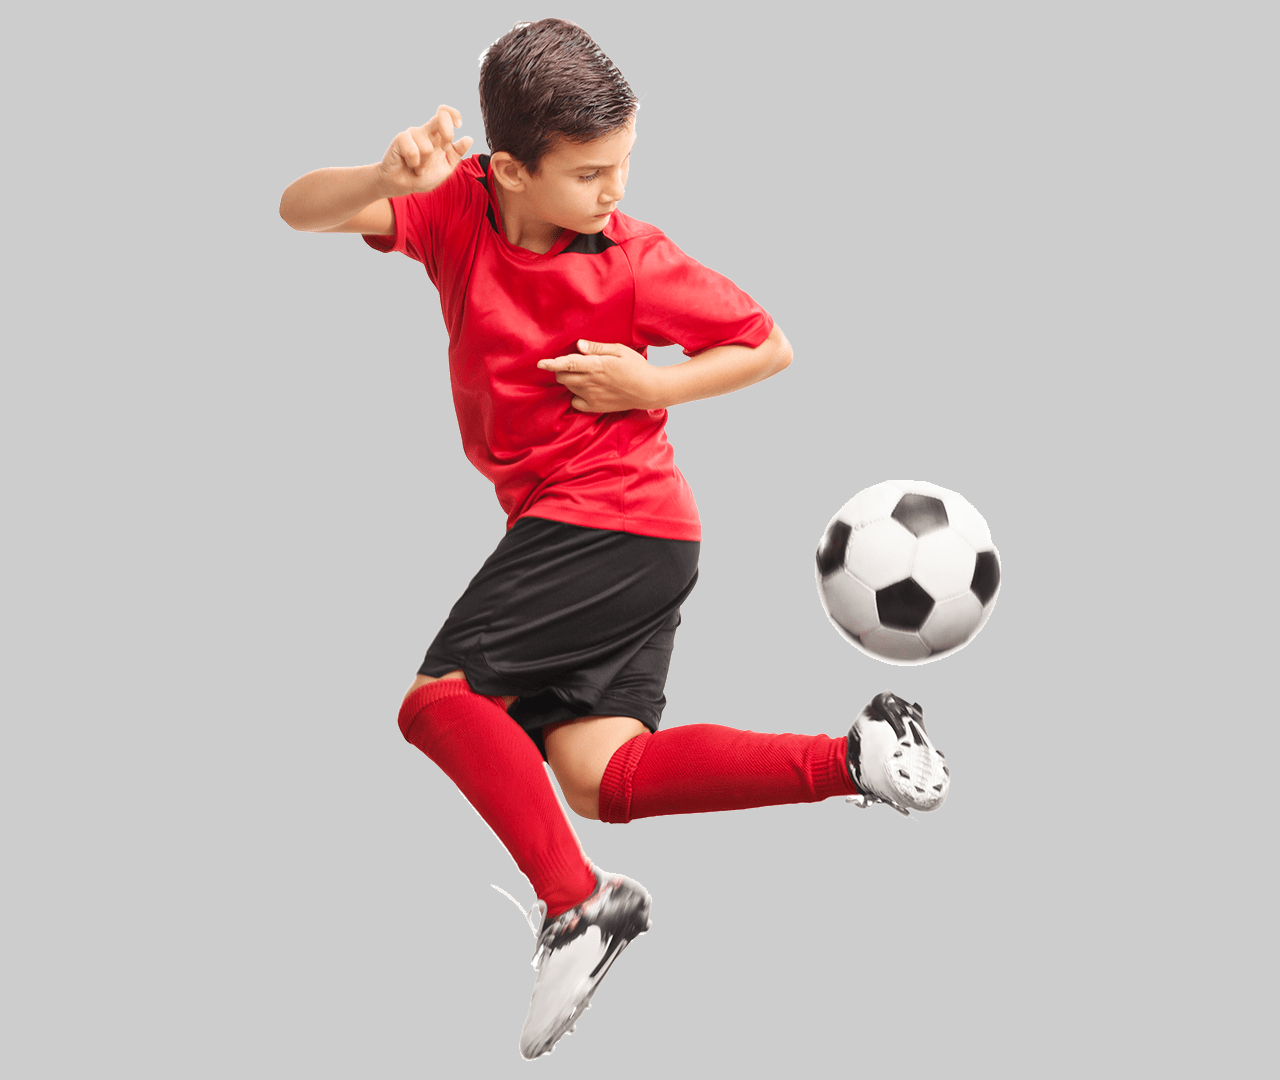 Boy jumping in the air and using his heel to kick the soccer ball, with a blank background